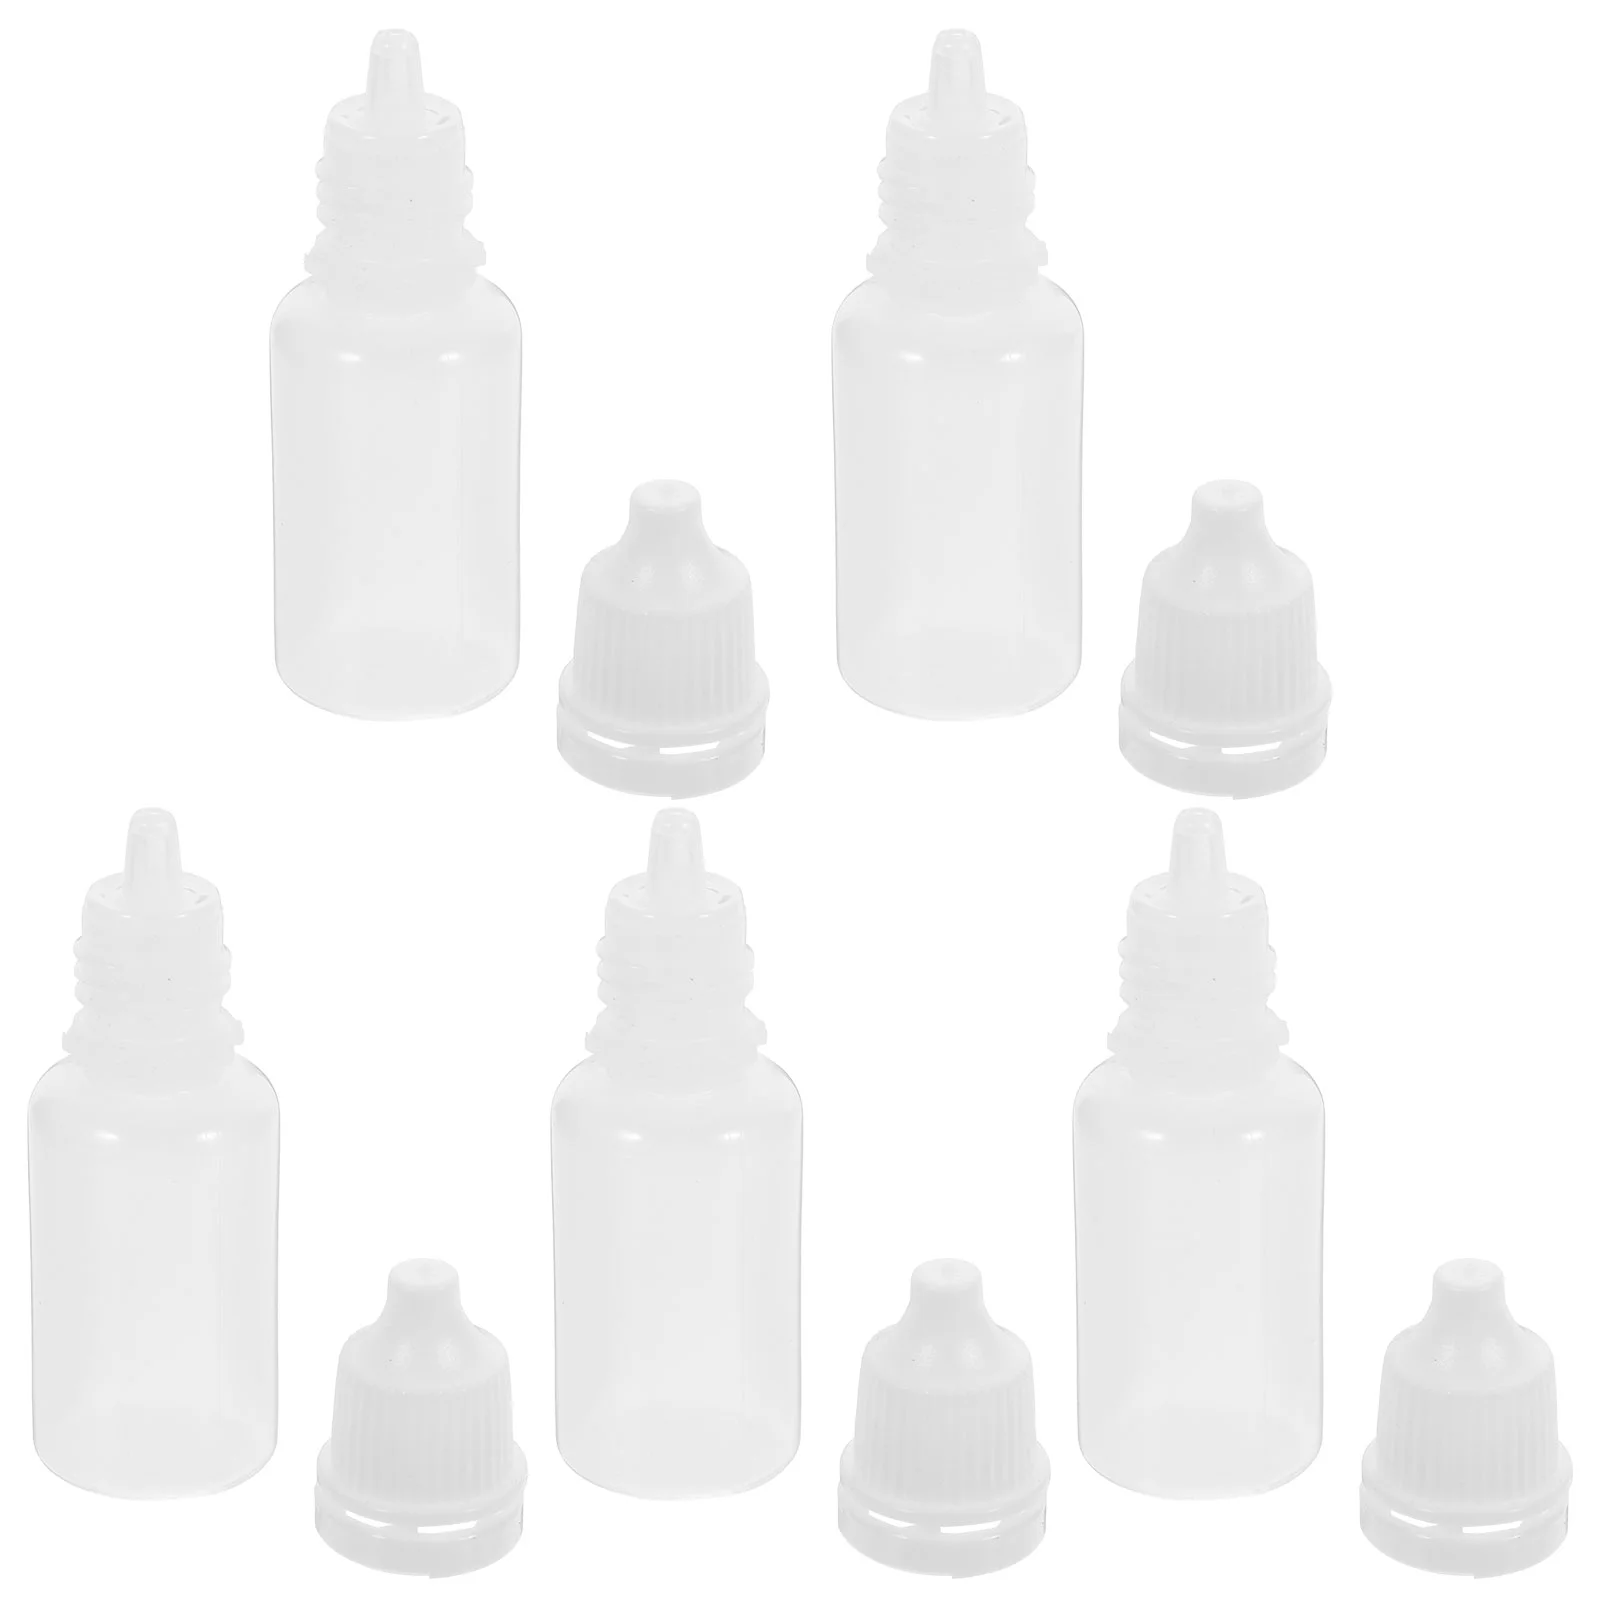 

5Pcs Squeezable Dropper Bottles 10ml Empty Eye Dropper Bottle Eye Dropping Bottles Portable Eye Drops Containers Dispenser for